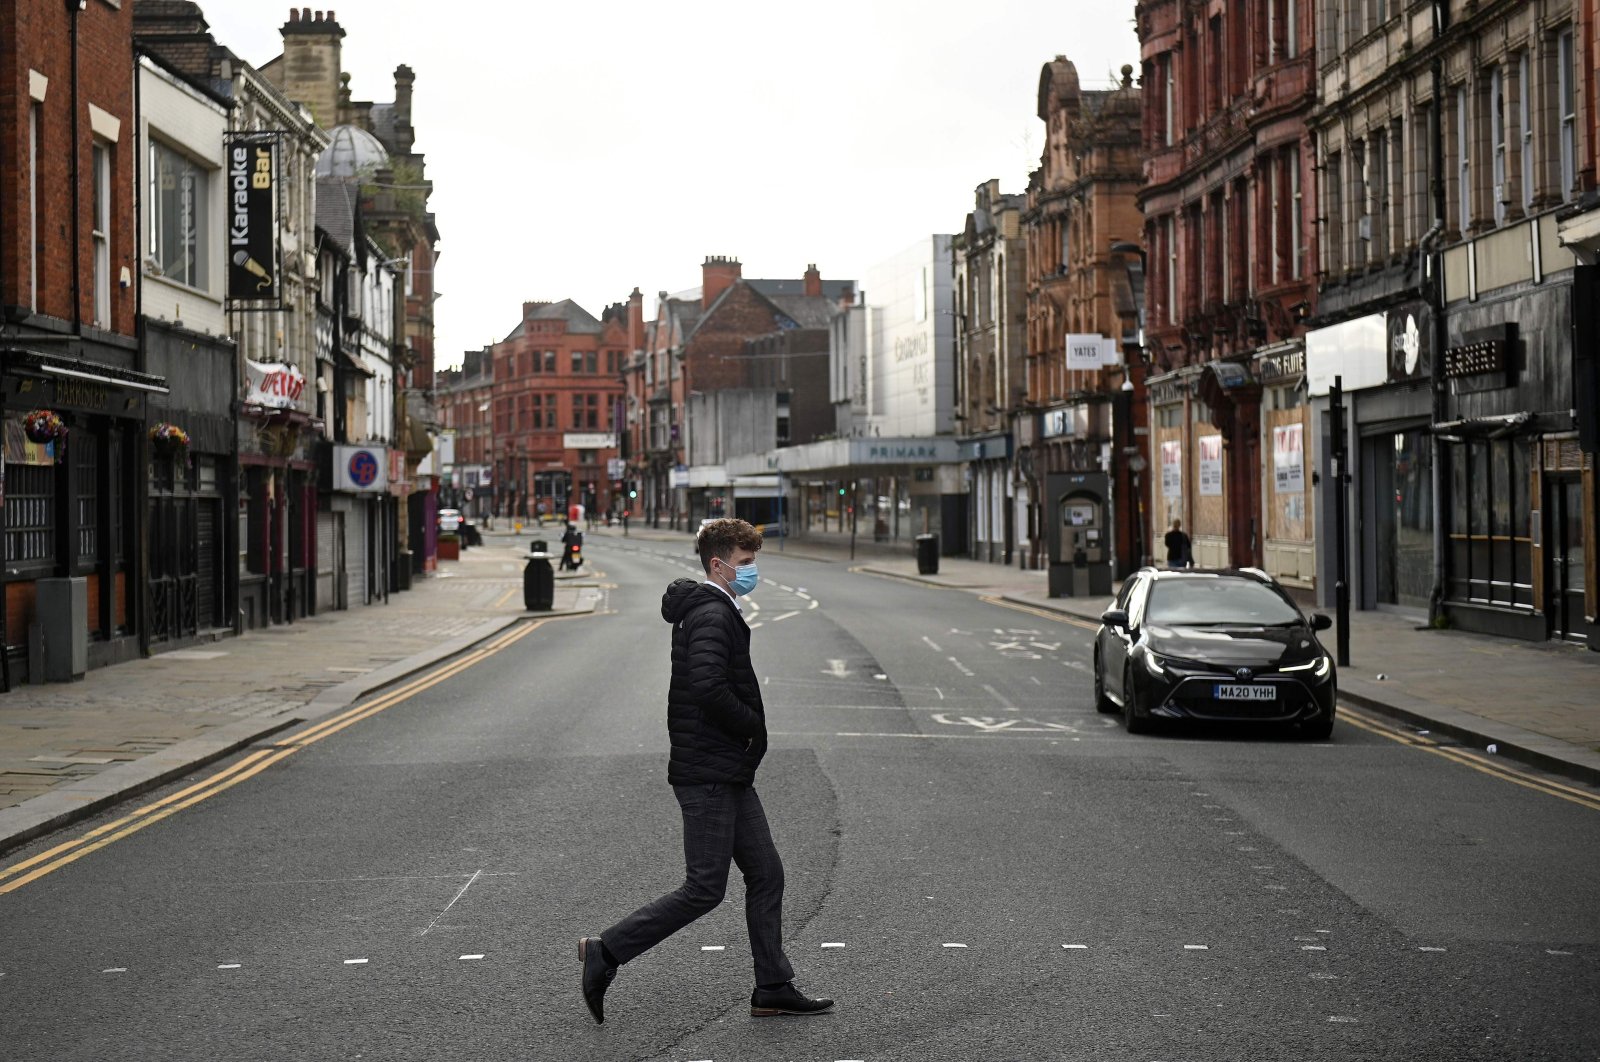 A man wearing a face mask due to the COVID-19 pandemic crosses an almost empty road in the center of Bolton, northern England, Sept. 9, 2020. (AFP Photo)